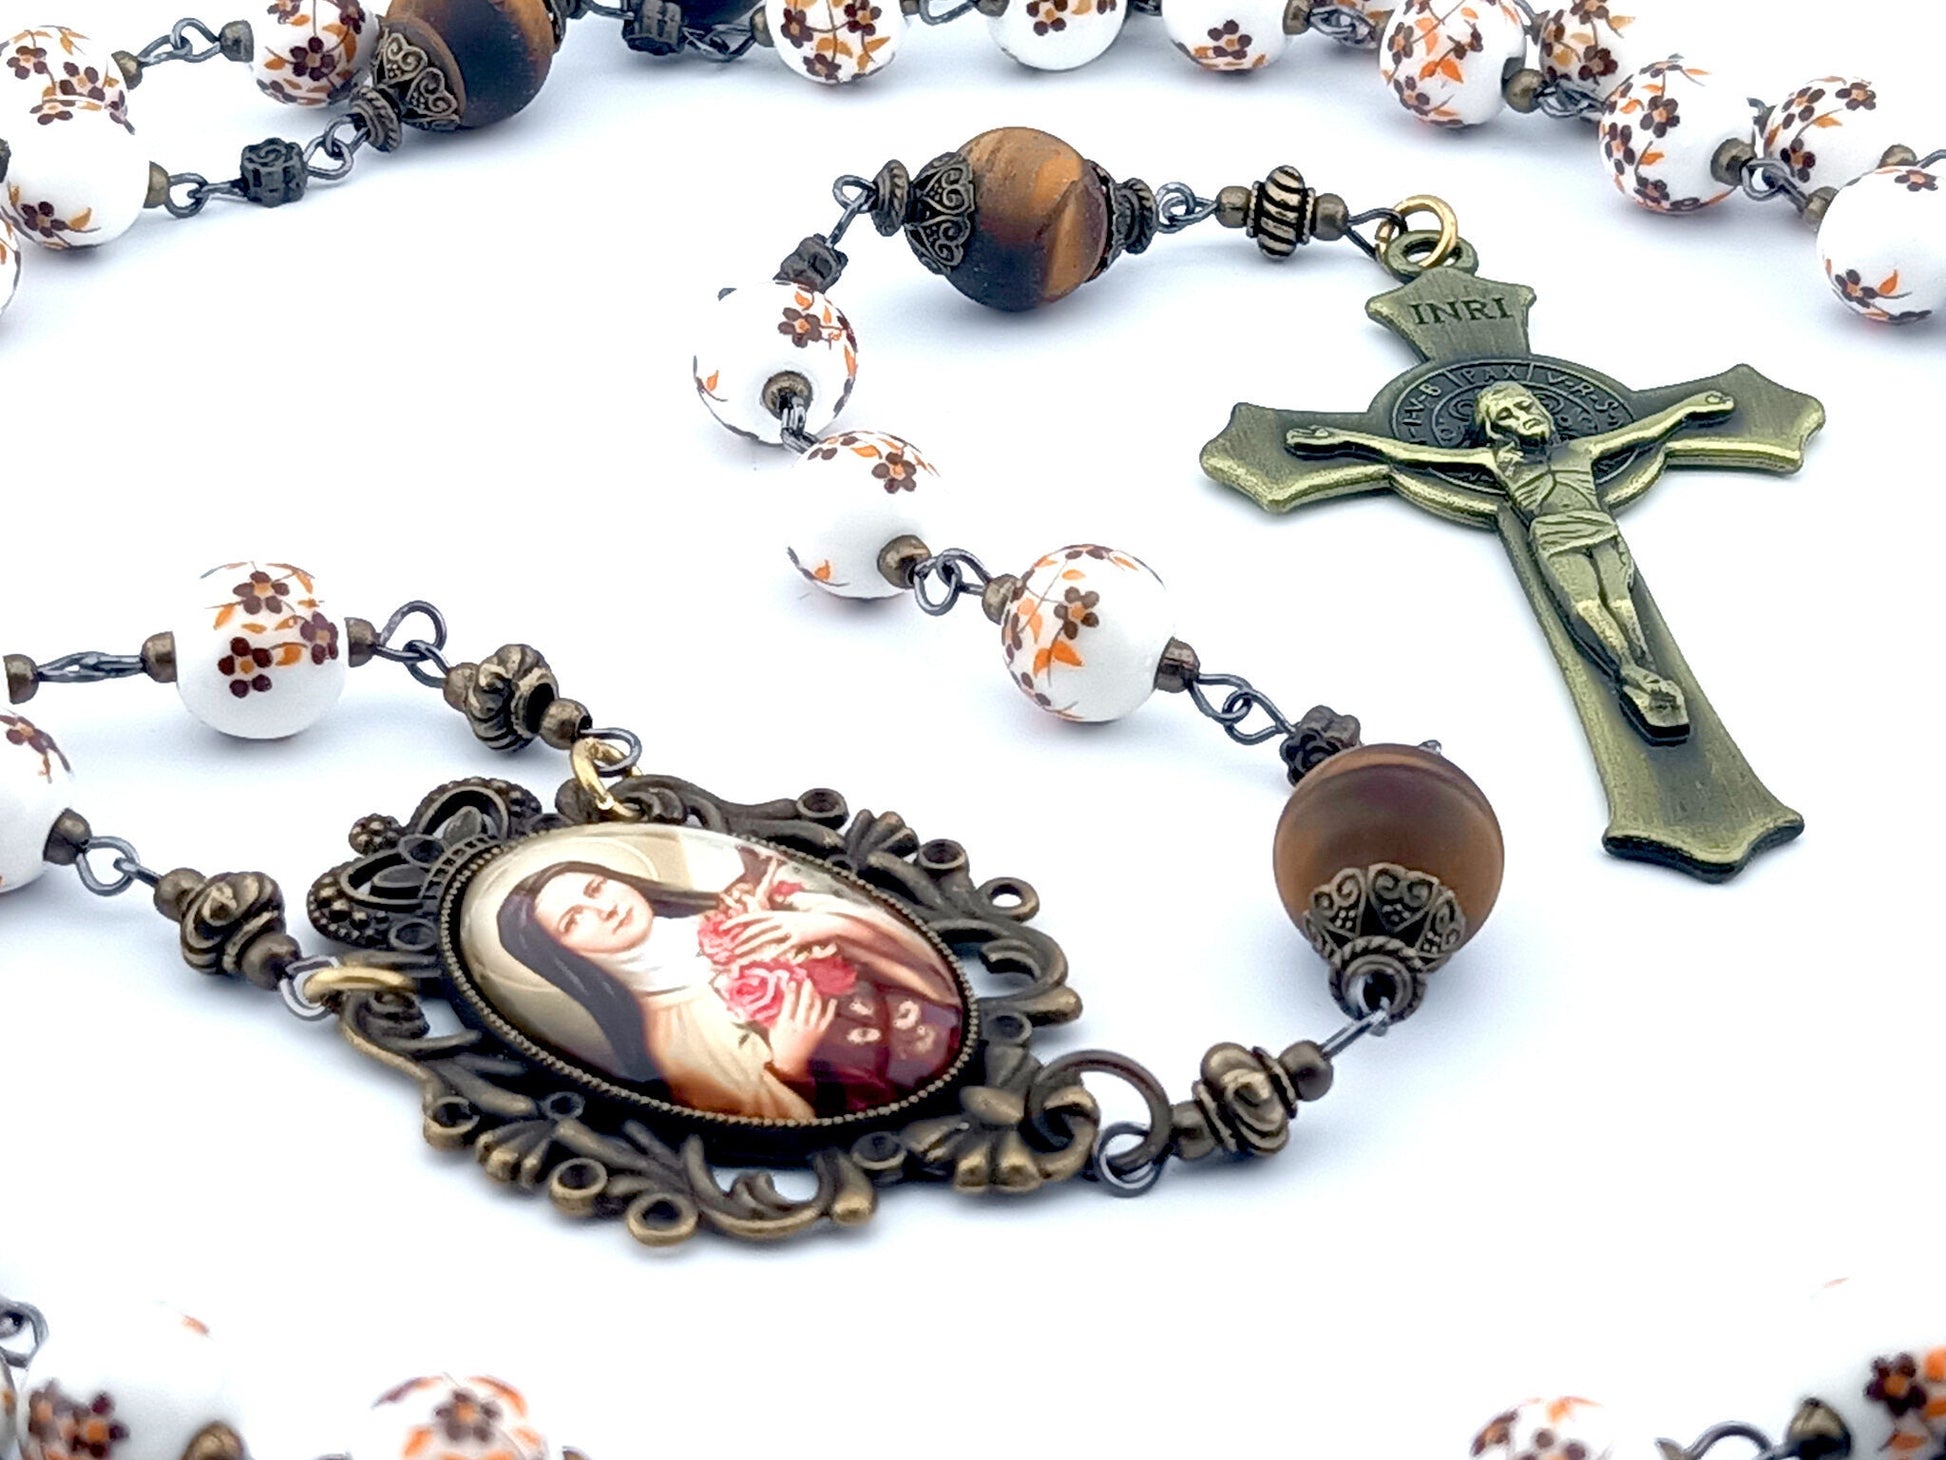 Saint Therese of Lisieux unique rosary beads with porcelain and tigers eye beads, bronze crucifix and picture centre medal.